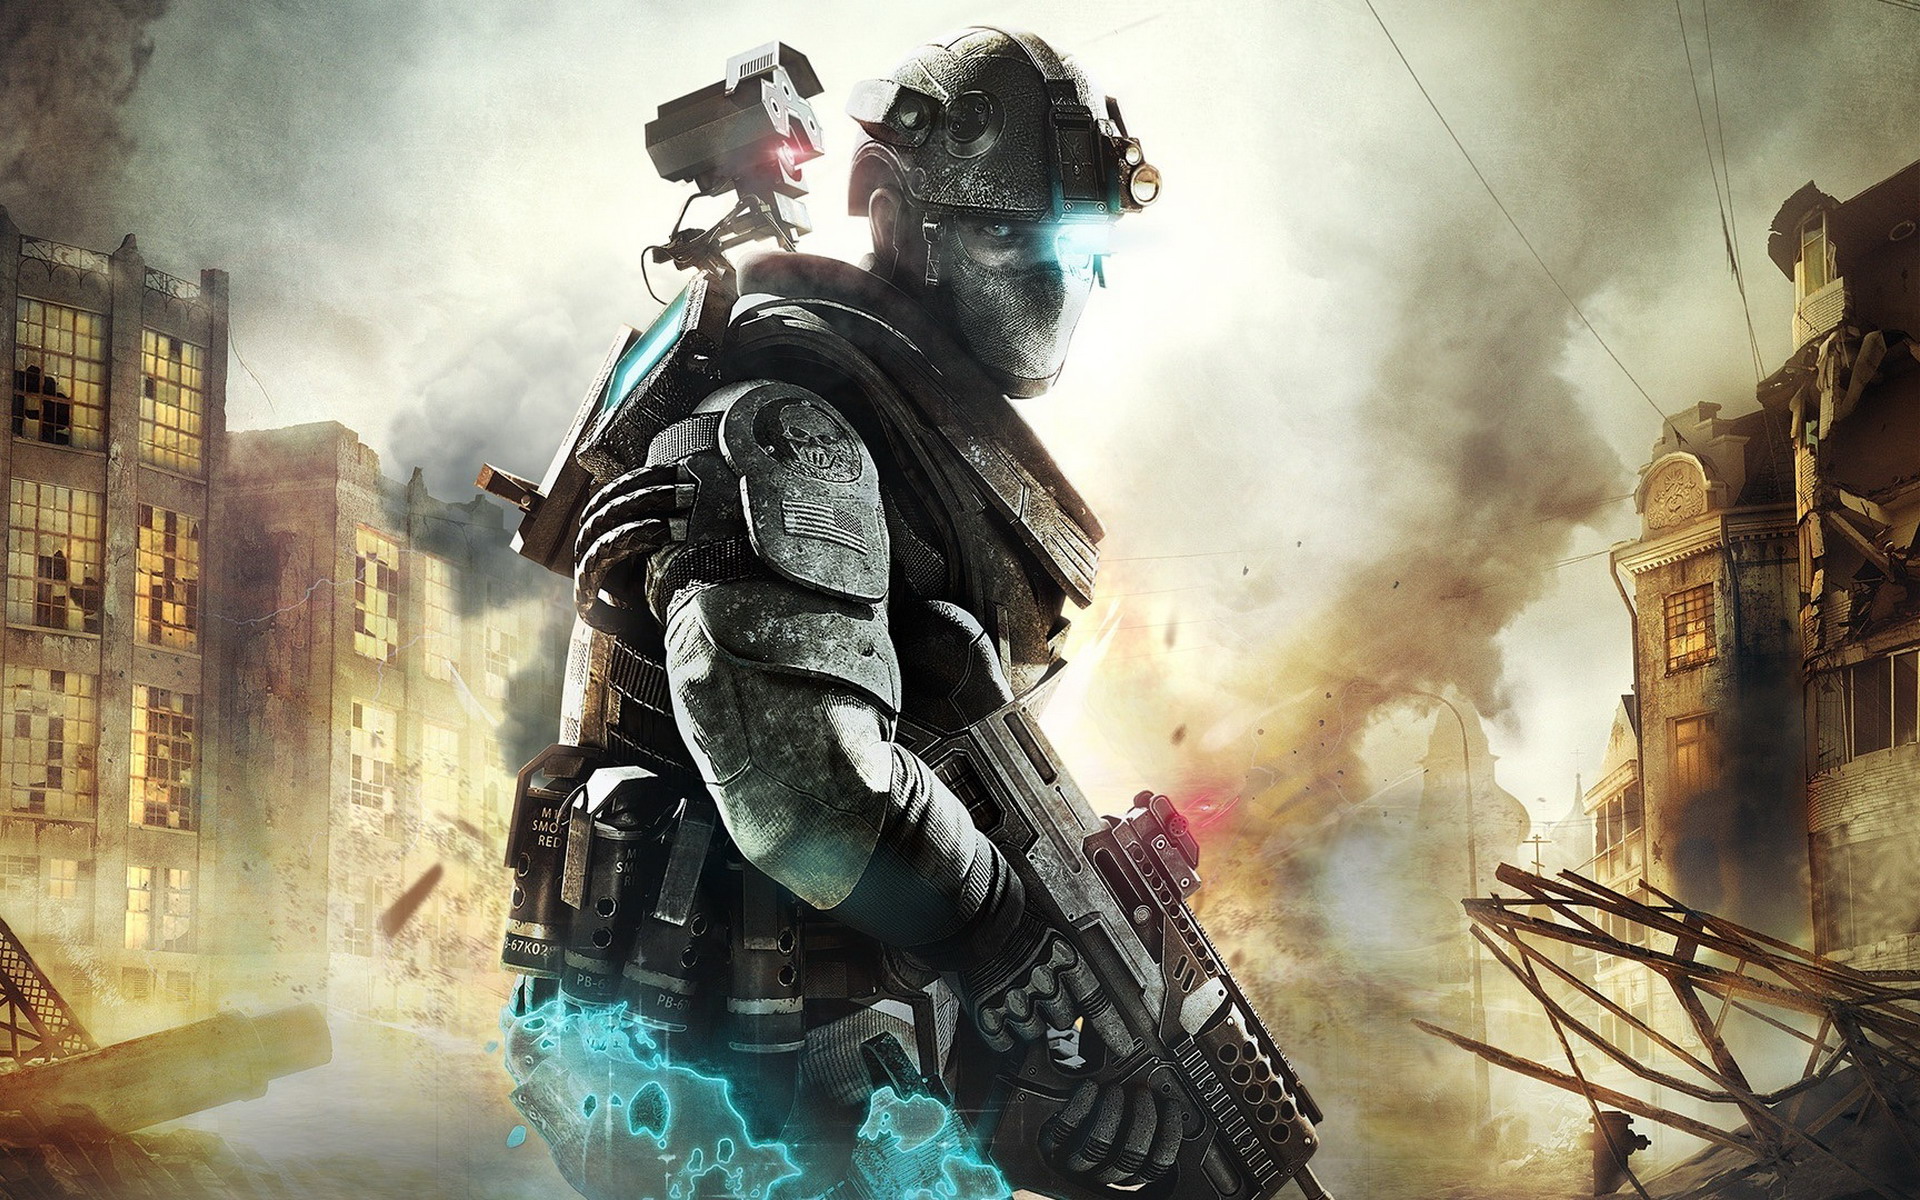 Ghost Recon: Future Soldier Will Have “20 Million Combinations” Of Weapon Customisations